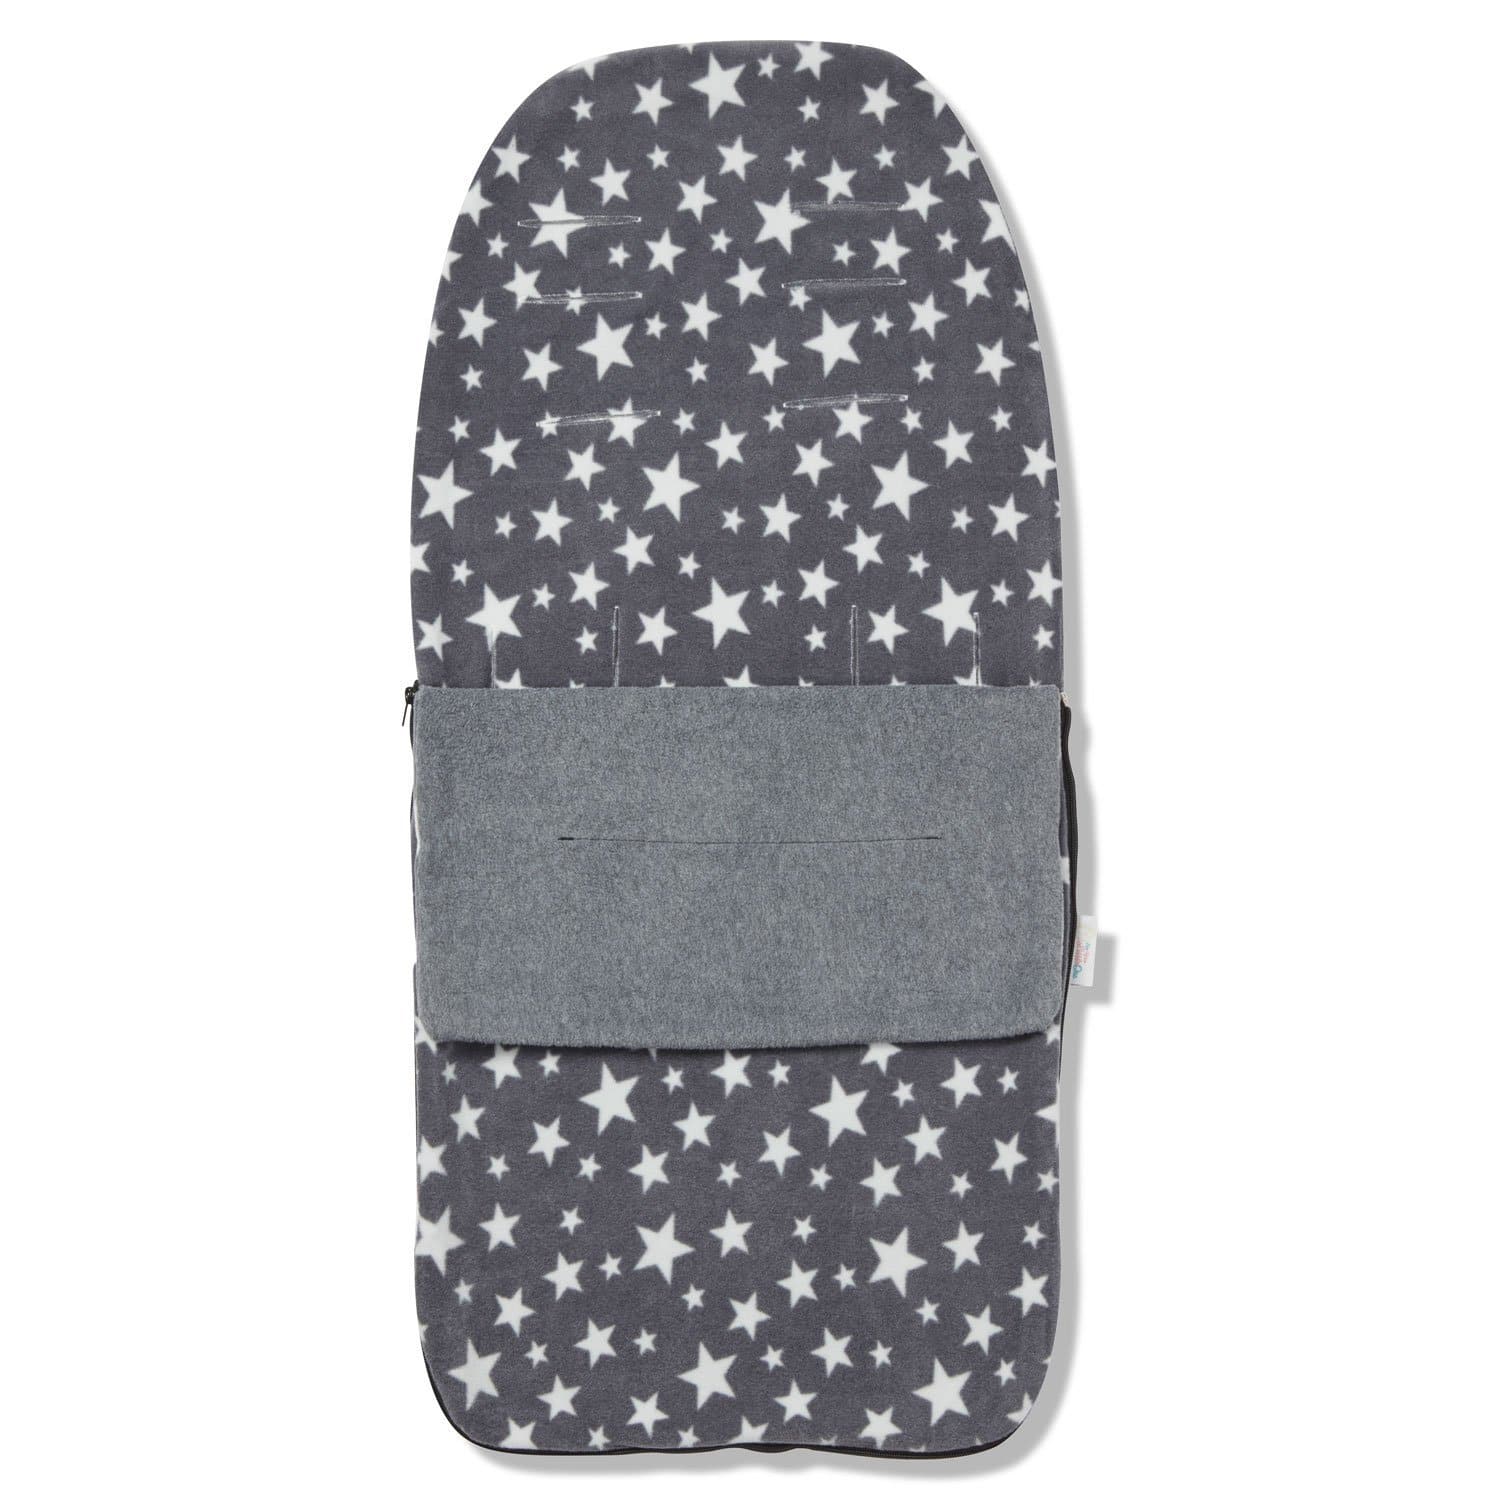 Snuggle Summer Footmuff Compatible with Mamas & Papas - For Your Little One